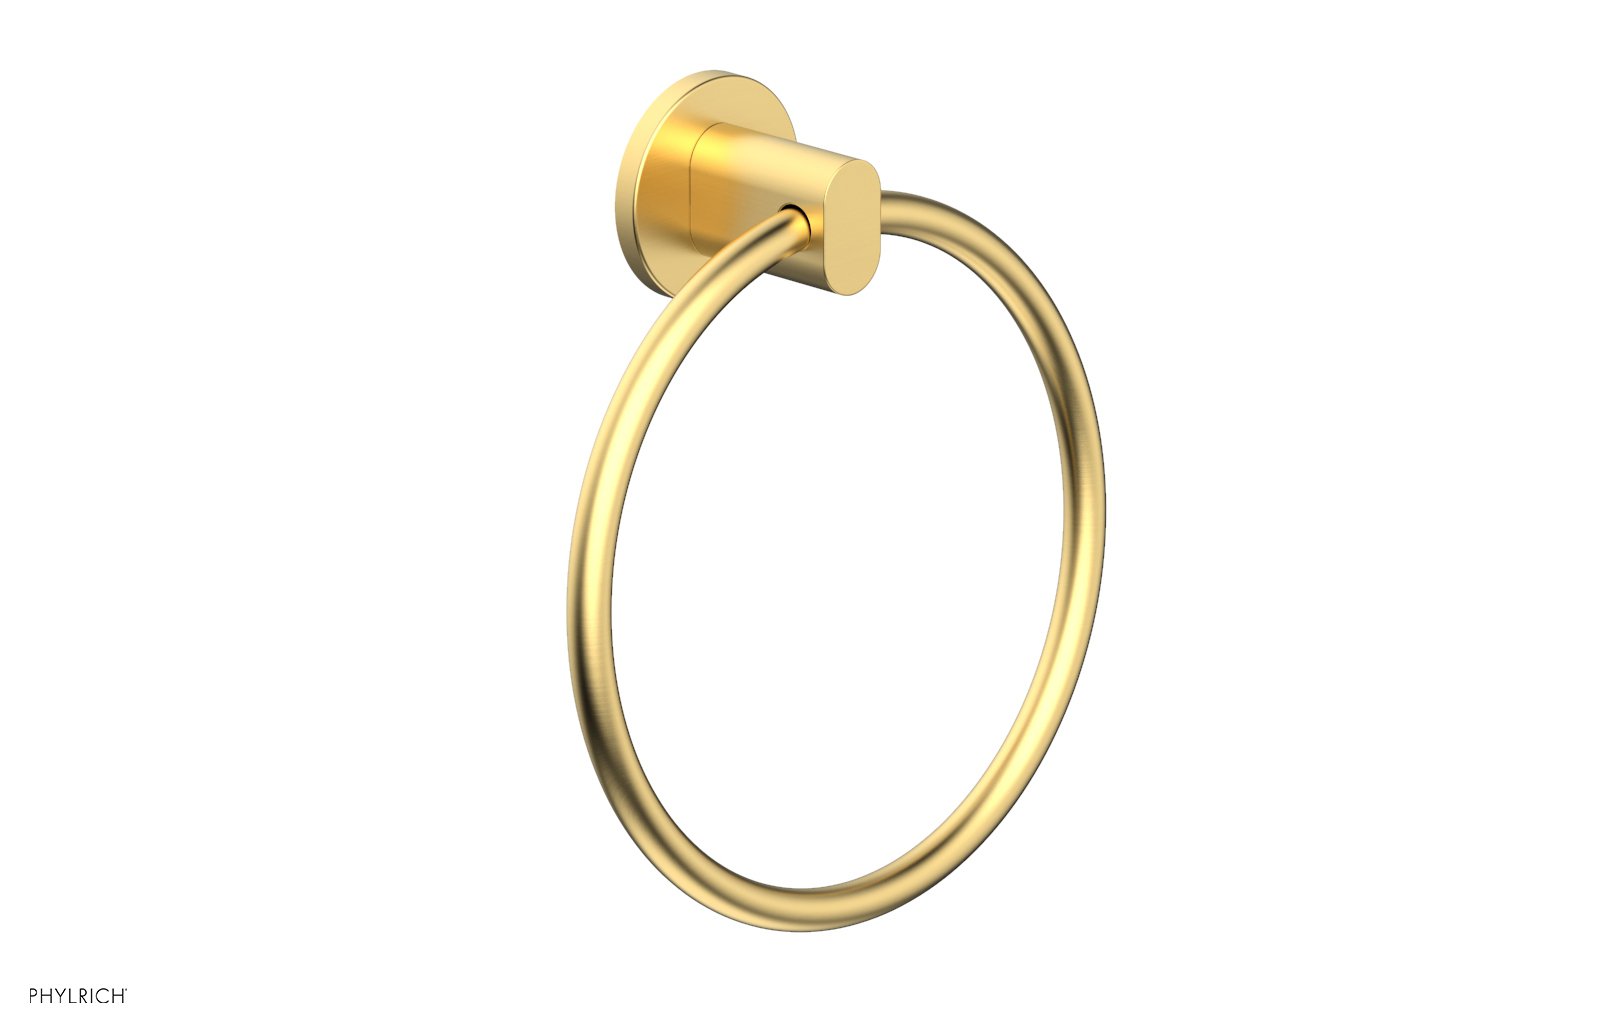 Phylrich ROND Contemporary Towel Ring